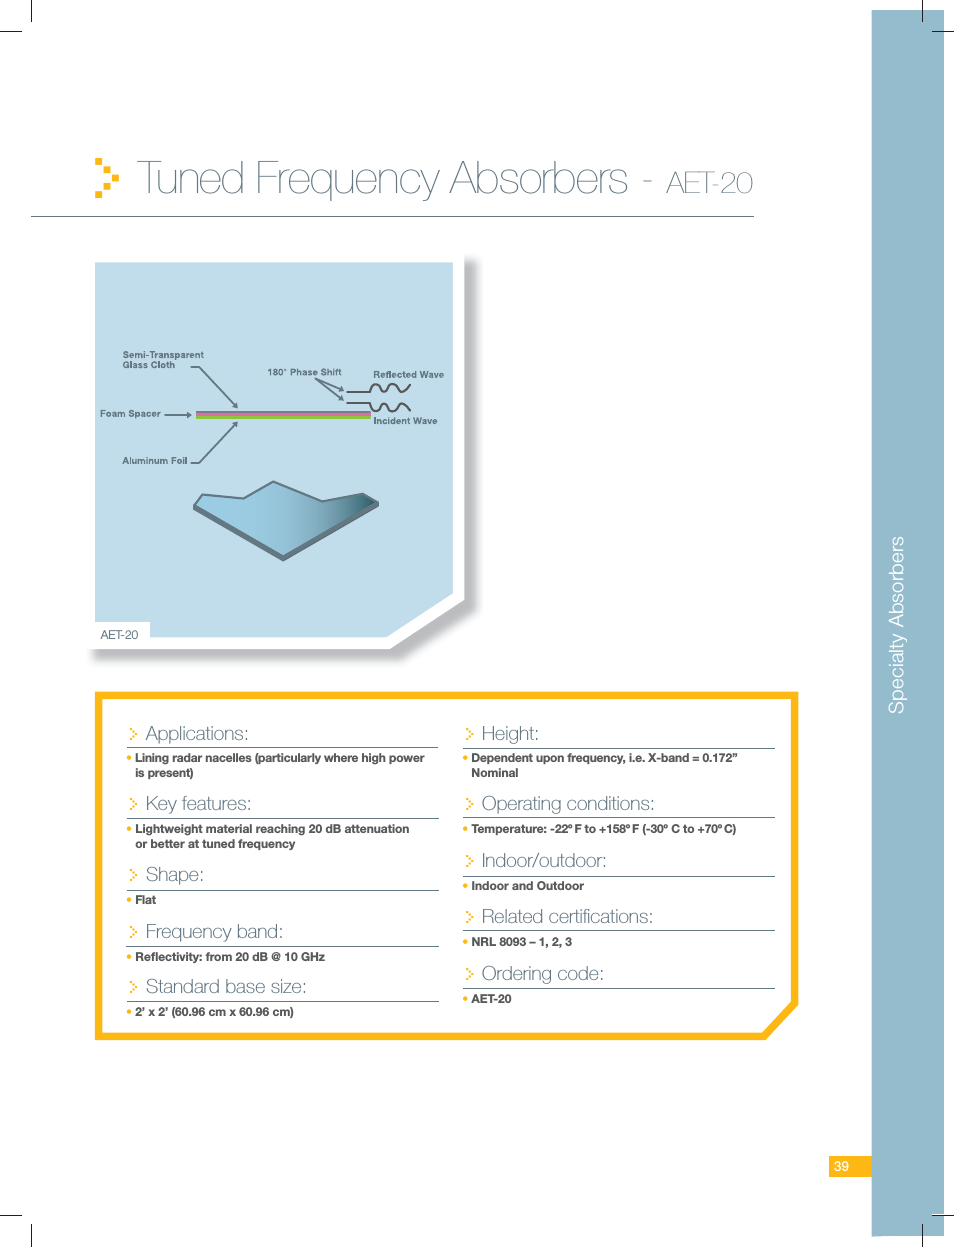 Tuned Frequency Absorbers - AET-20